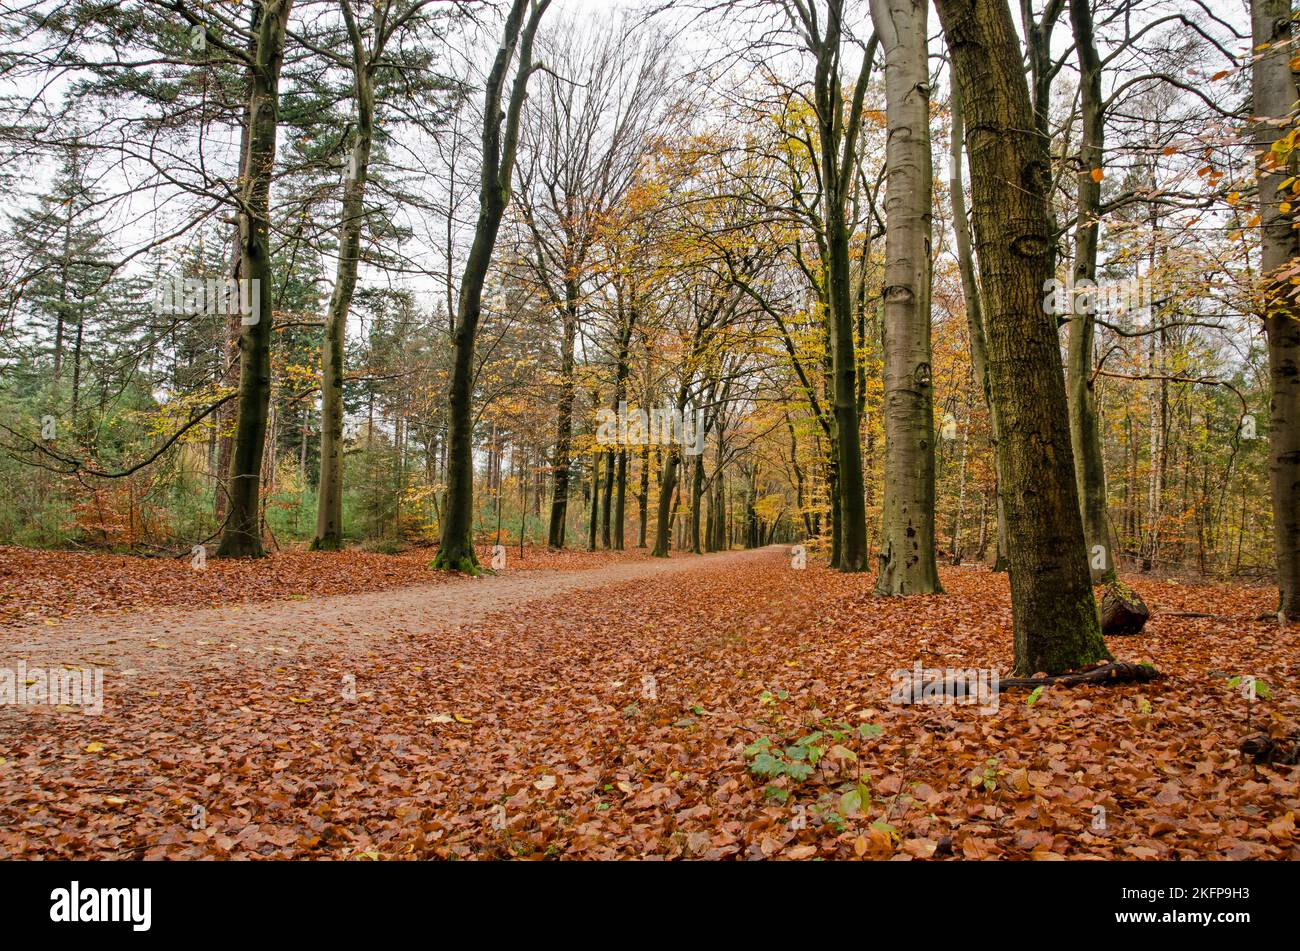 Diminishing perspective of a road in the forest near Austerlitz, The Netherlands in autumn Stock Photo